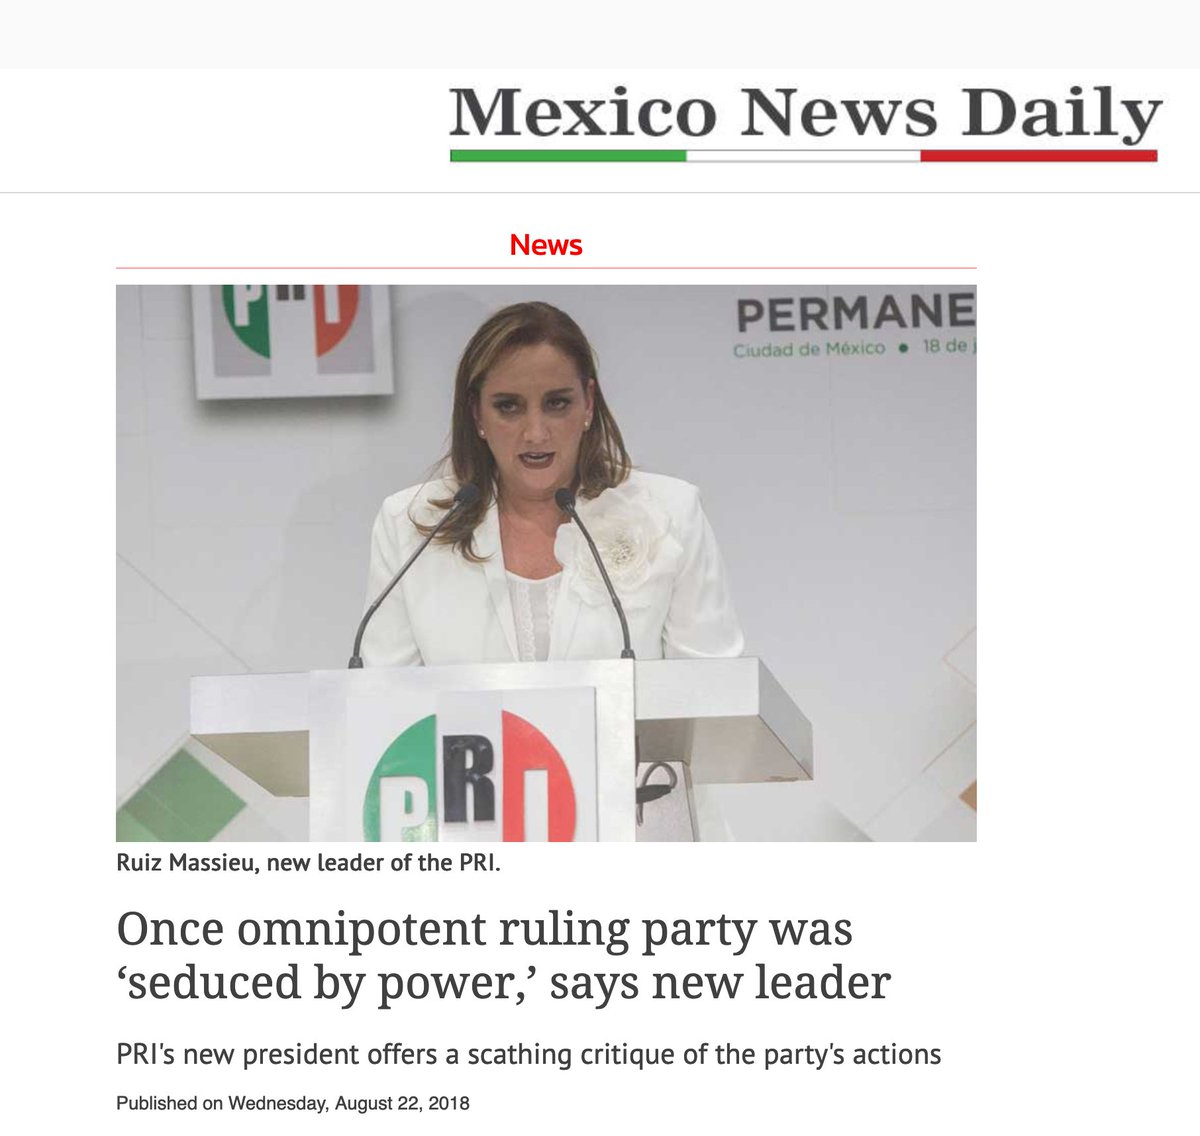 Claudia Salinas, Marco Lopez's friend and political ally. Seems nice enough, from this picture, wouldn't you say?So the question remains. Does Ducey understand he's involved with the Mexican political family best known for stealing elections in North America?If so, not good.